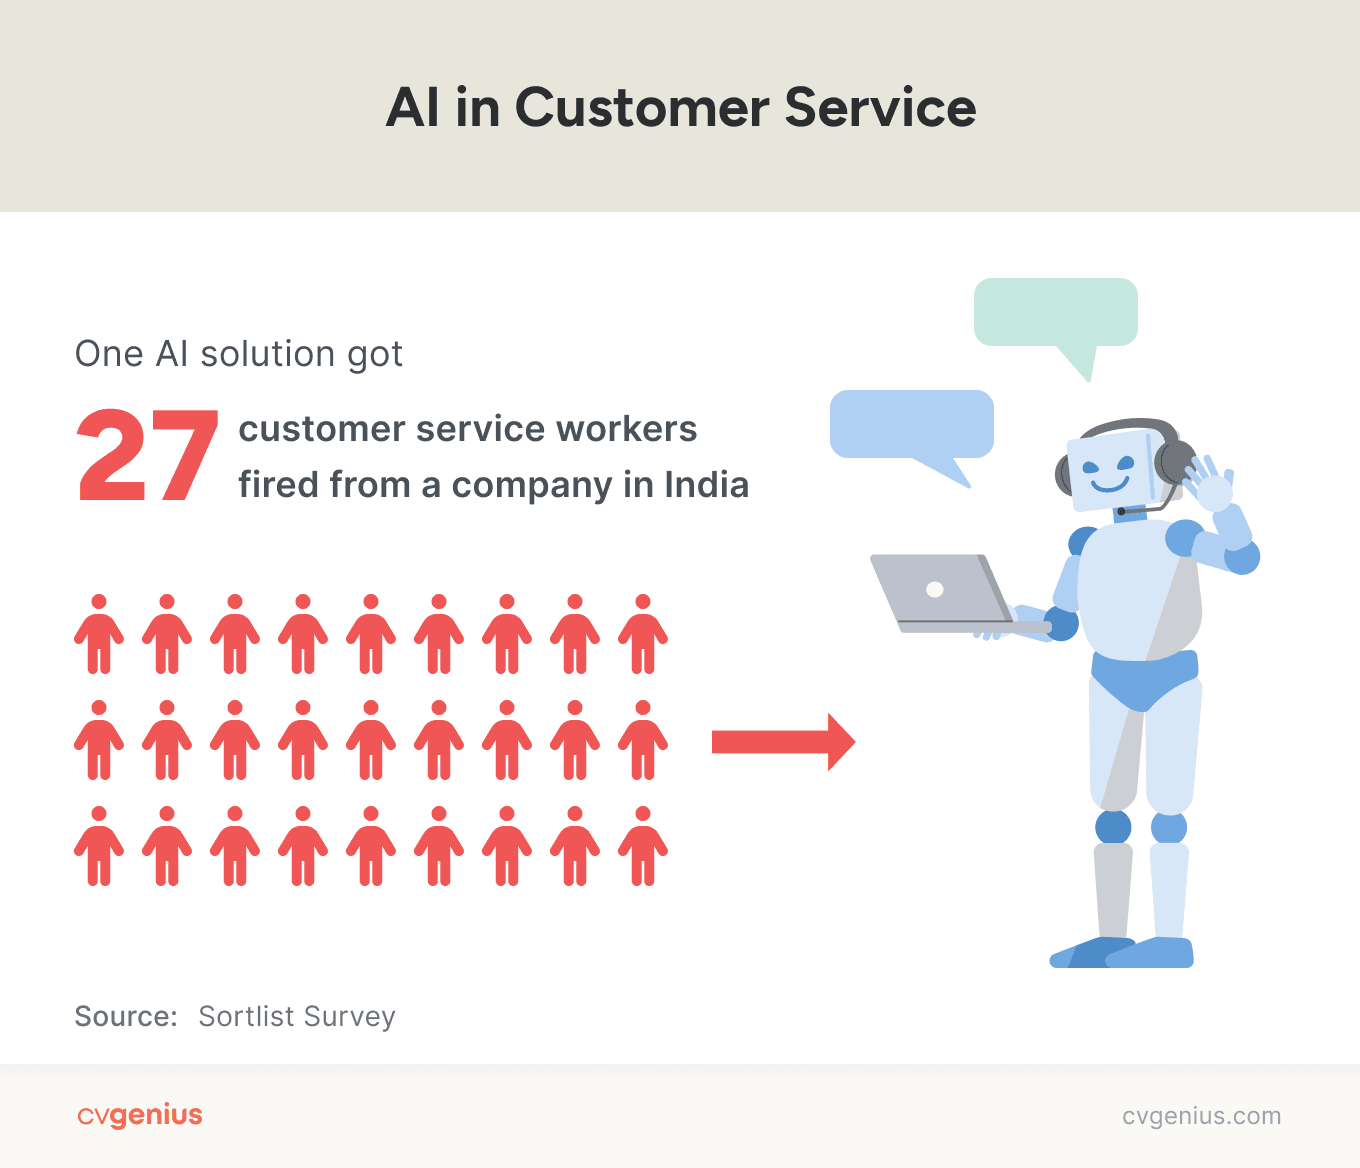 A robot gives a peace sign to 27 people, illustrating an anecdotal example of how AI will replace jobs in customer service.